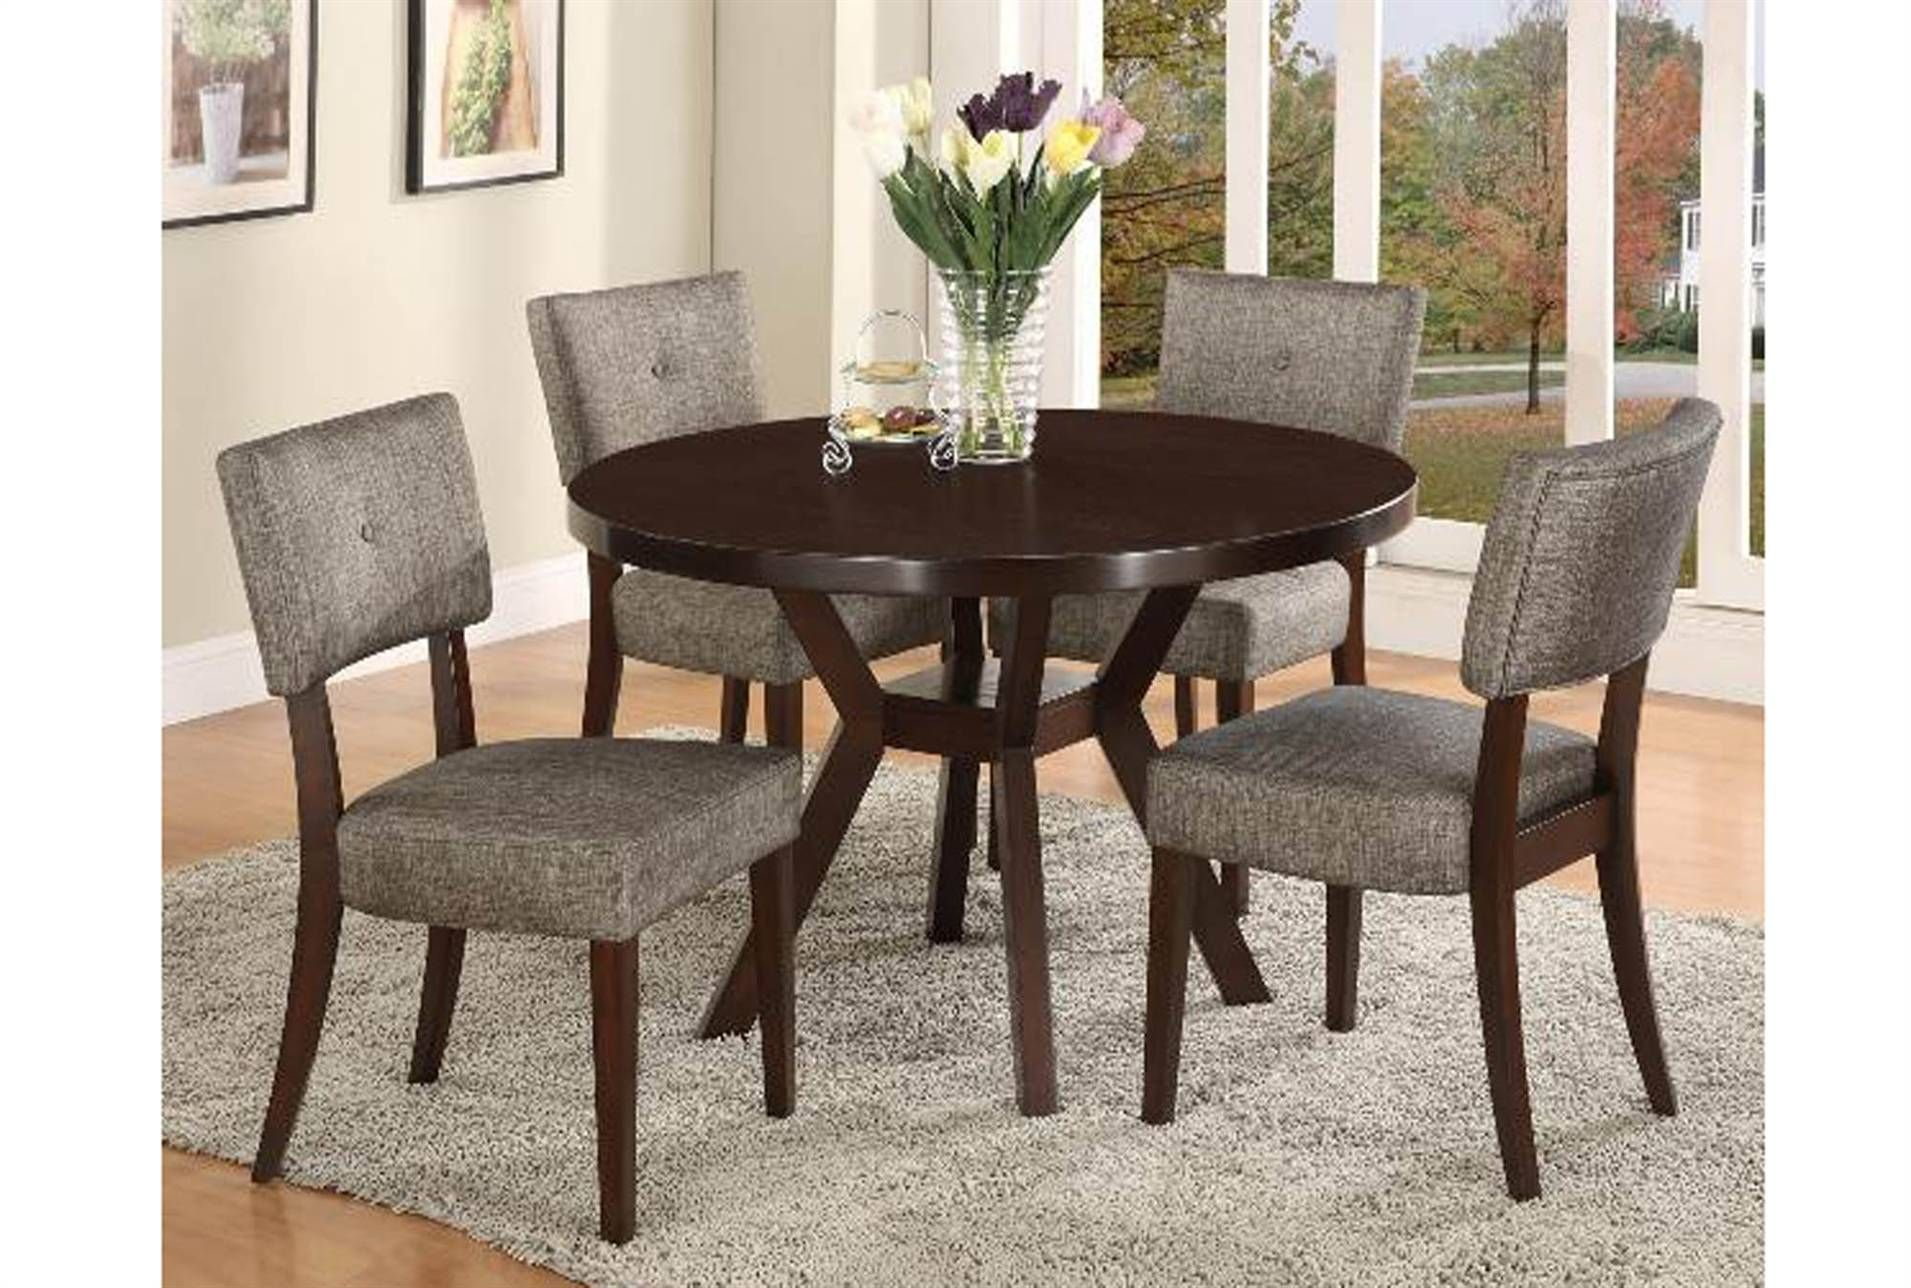 macie round dining room table sets